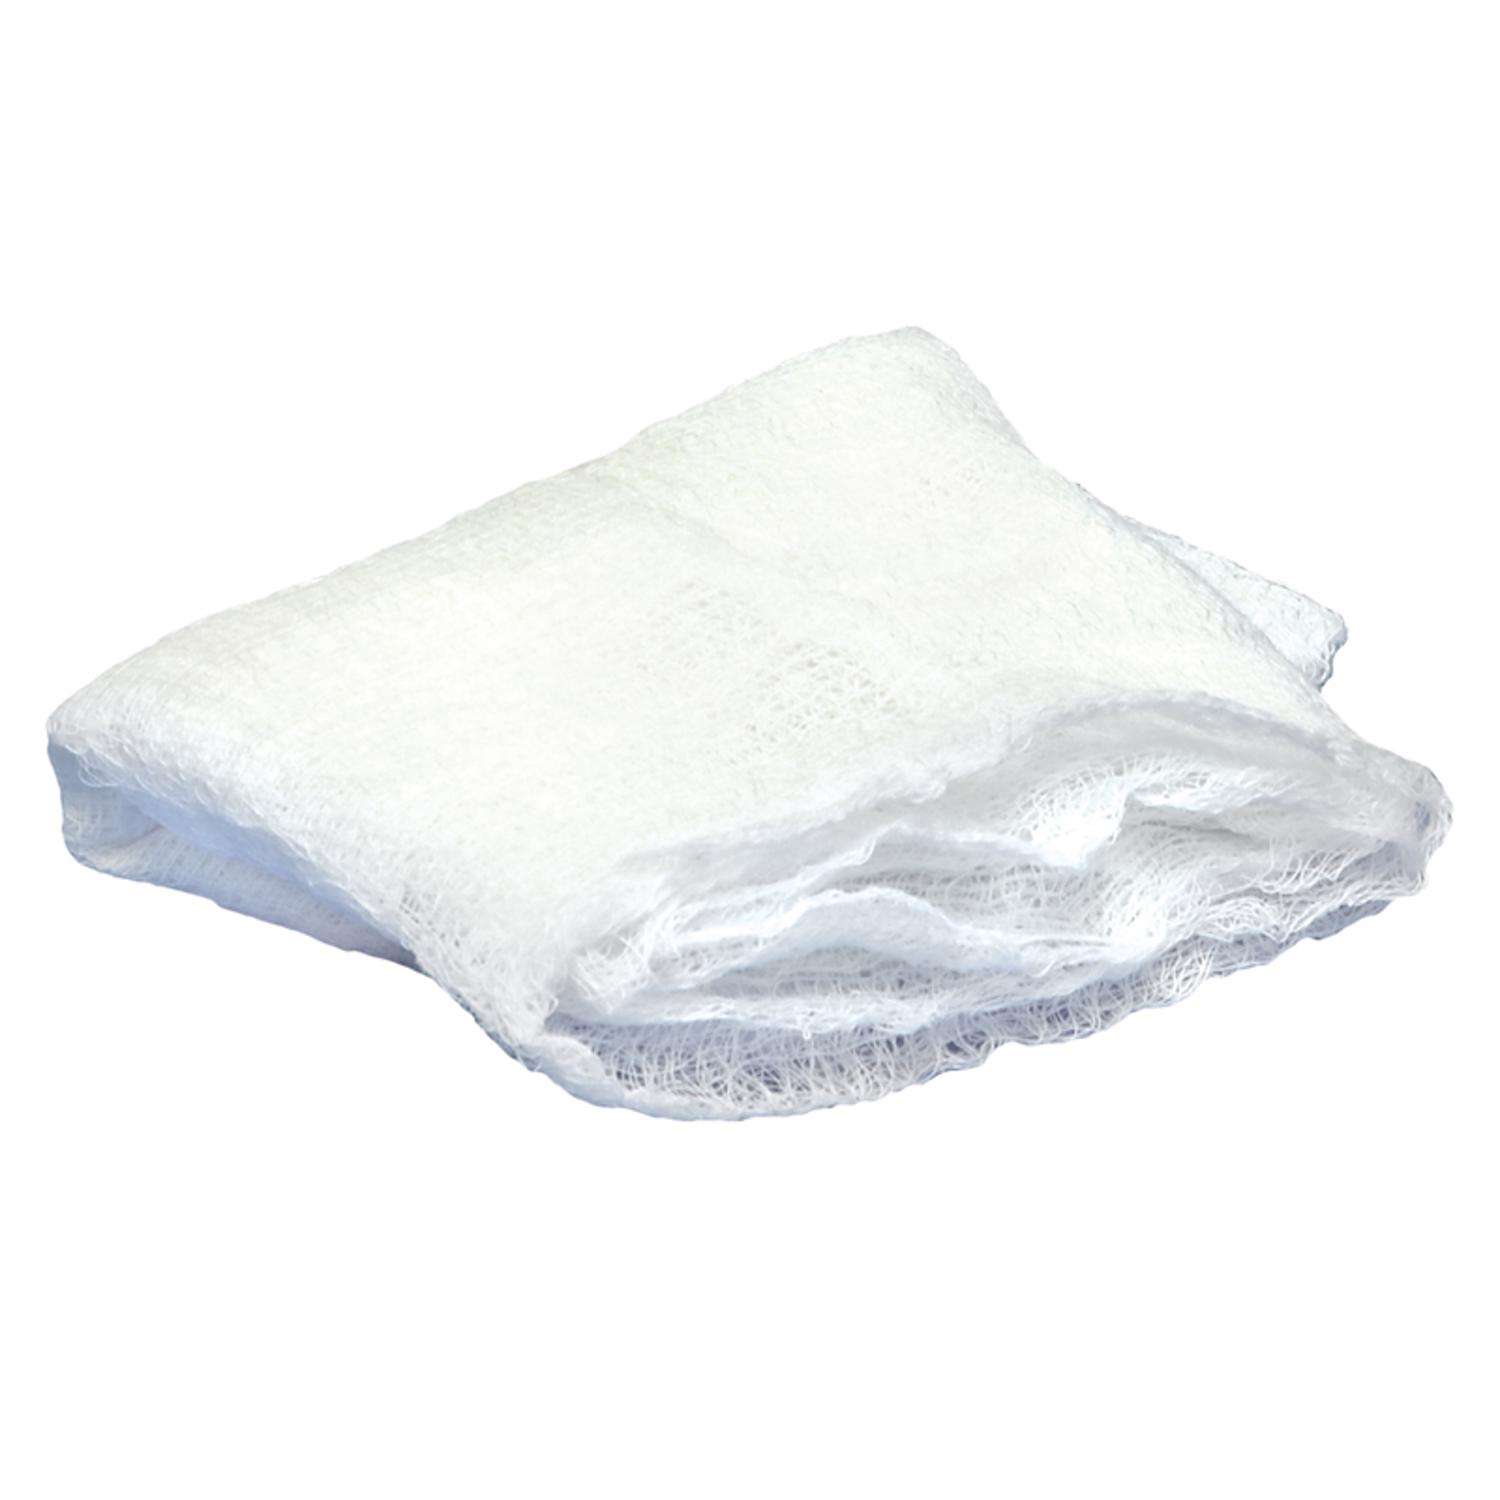 Terry Rags 5 lb Bar Towels - Tri-Us Janitorial Supplies